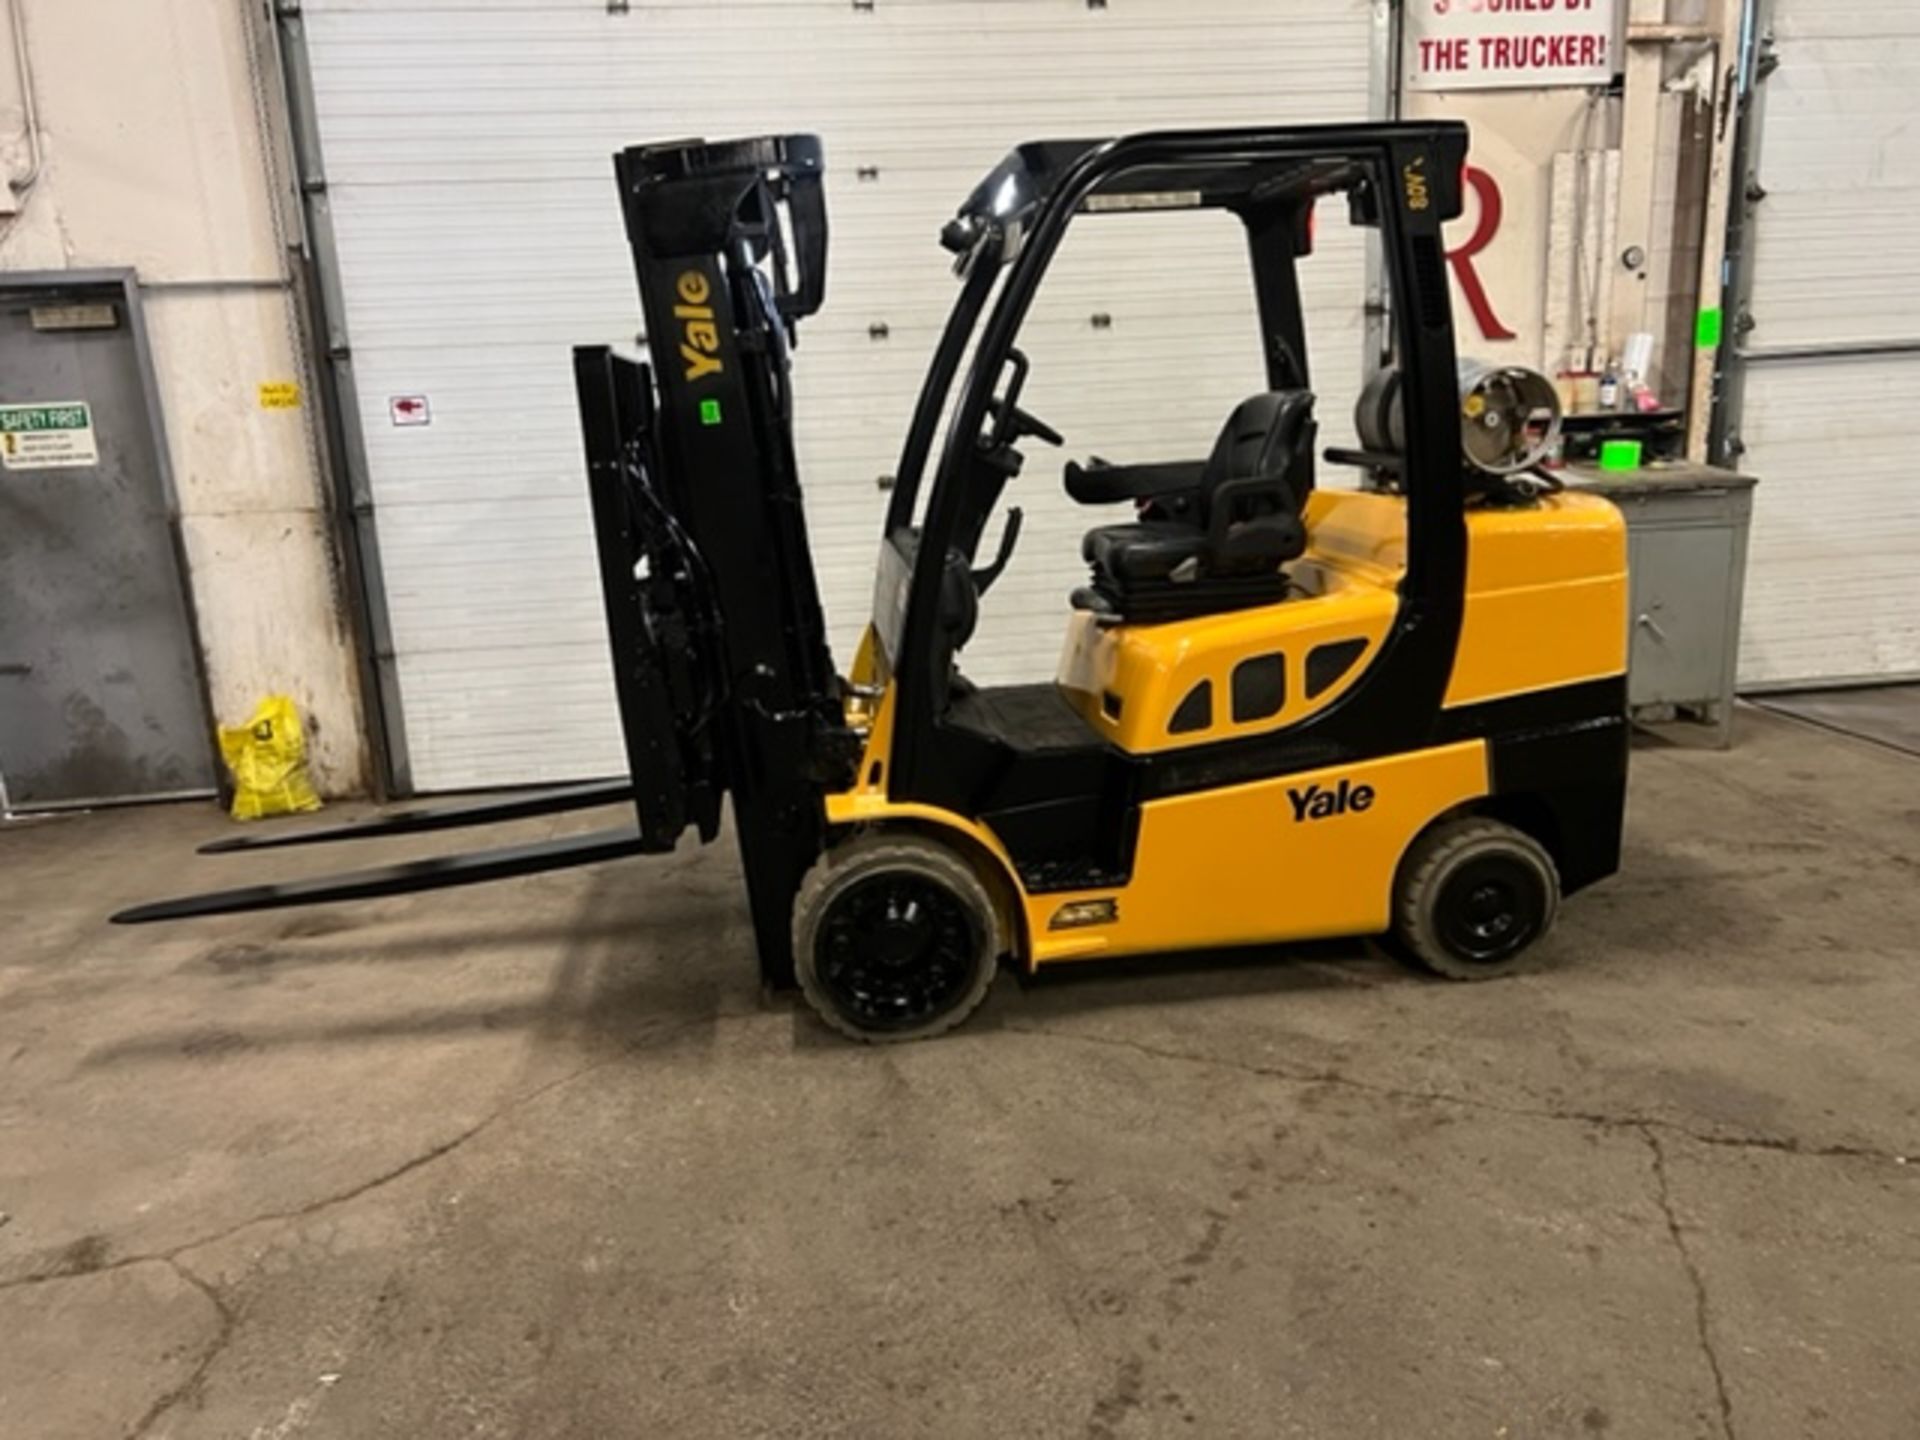 FREE CUSTOMS - NICE 2017 Yale model 80 - 8,000lbs Capacity Forklift LPG (propane) with 54" forks